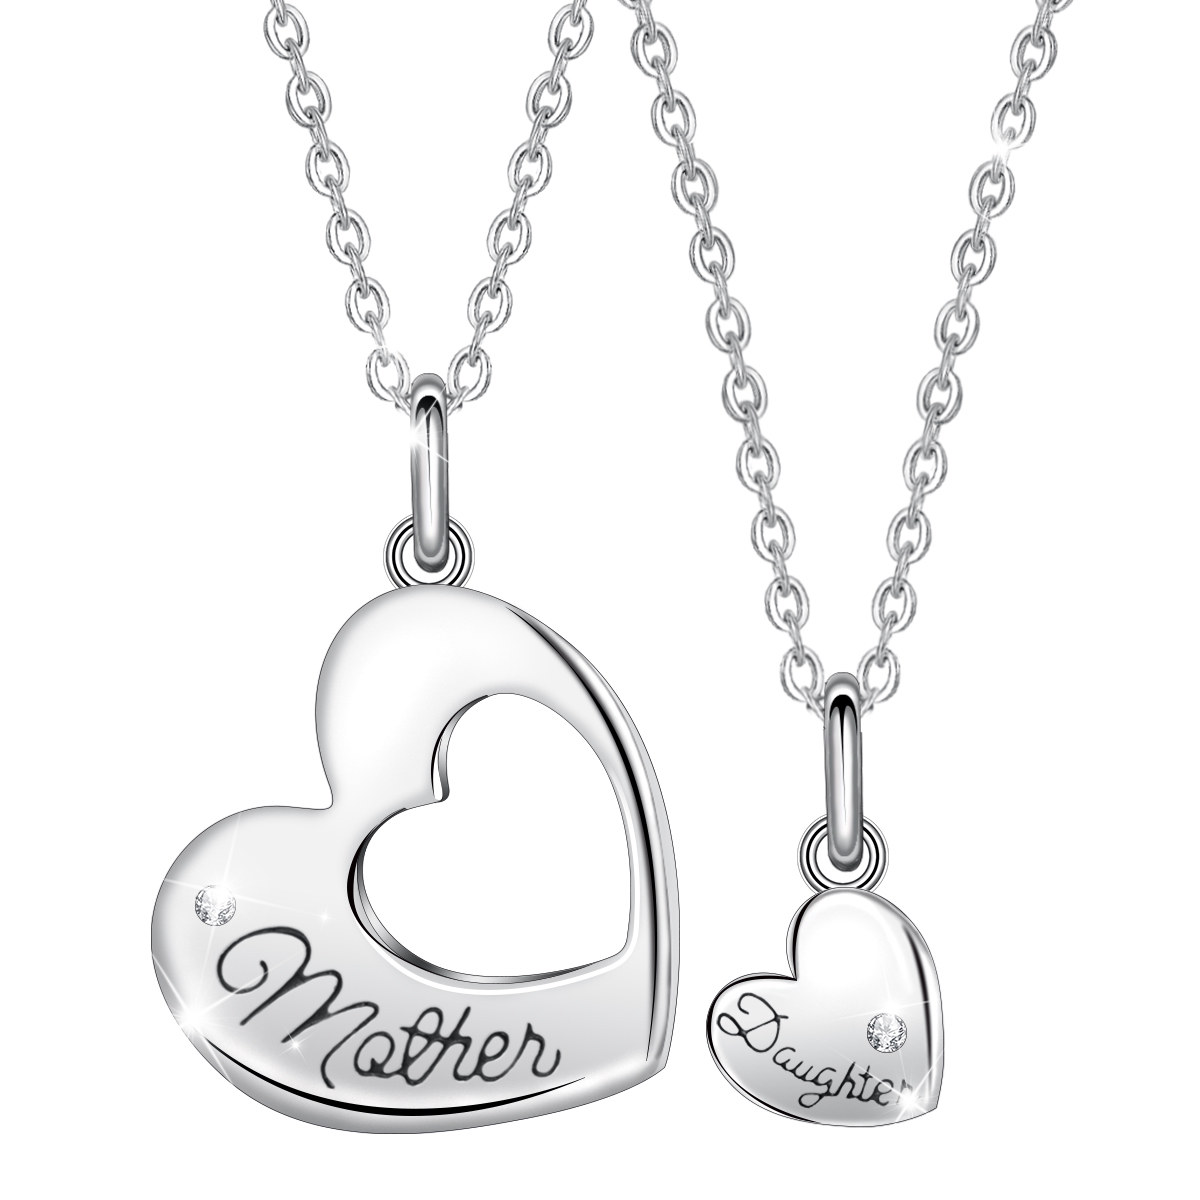 Merryshine 925 Sterling Silver Jewellery Mother and Daughter Heart Mothers Day Gifts Necklace